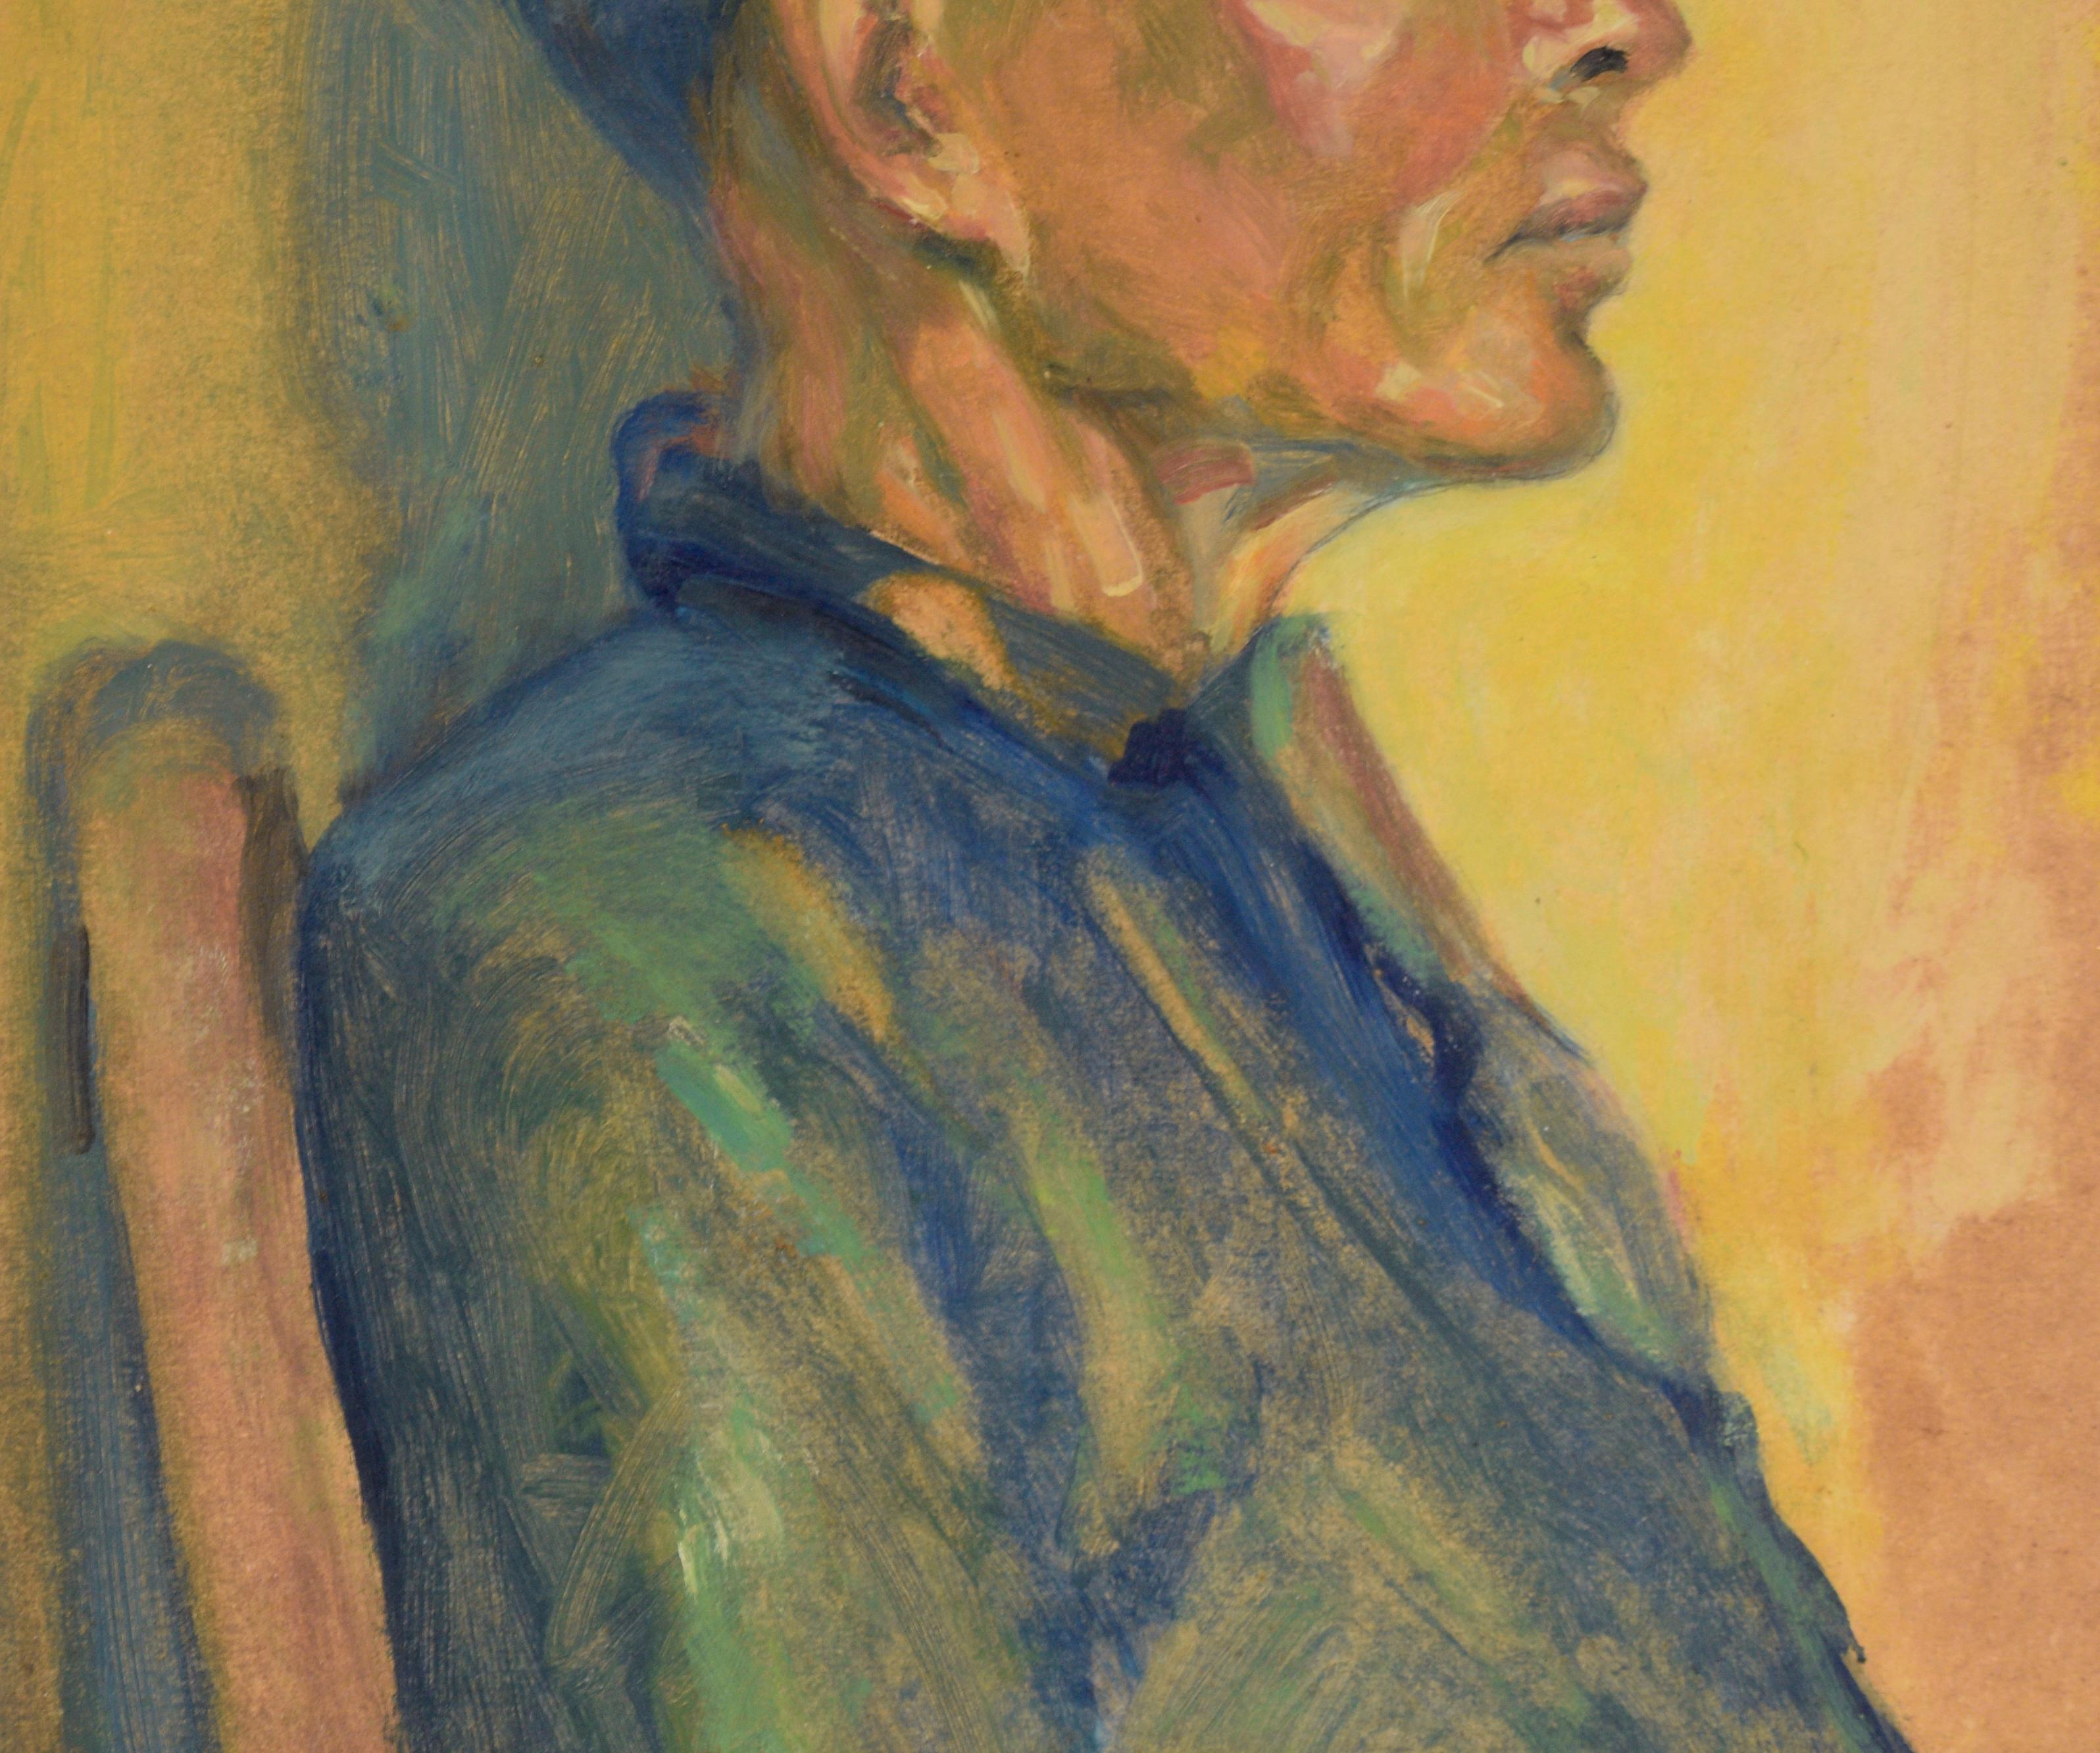 Portrait of a Distinguished Asian Gentleman - American Impressionist Painting by Celia B. Seymour